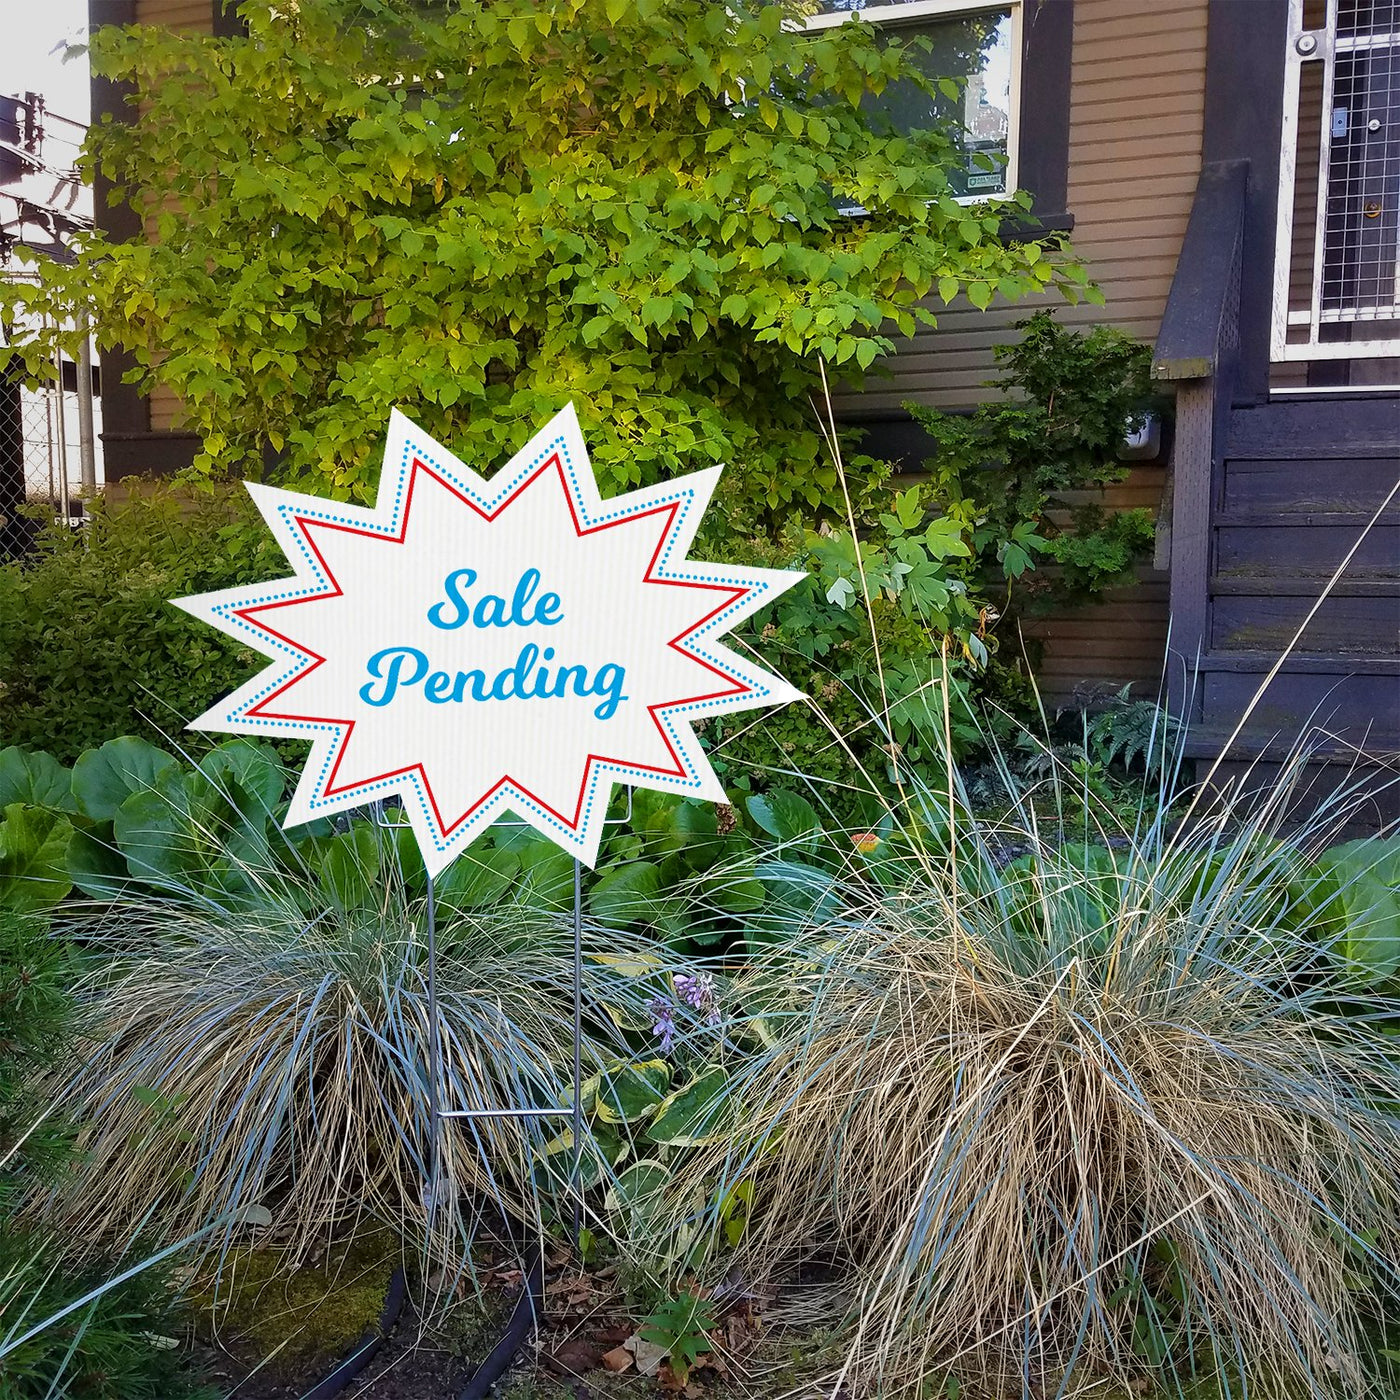 Sale Pending! - Explosion Yard Sign - All Things Real Estate